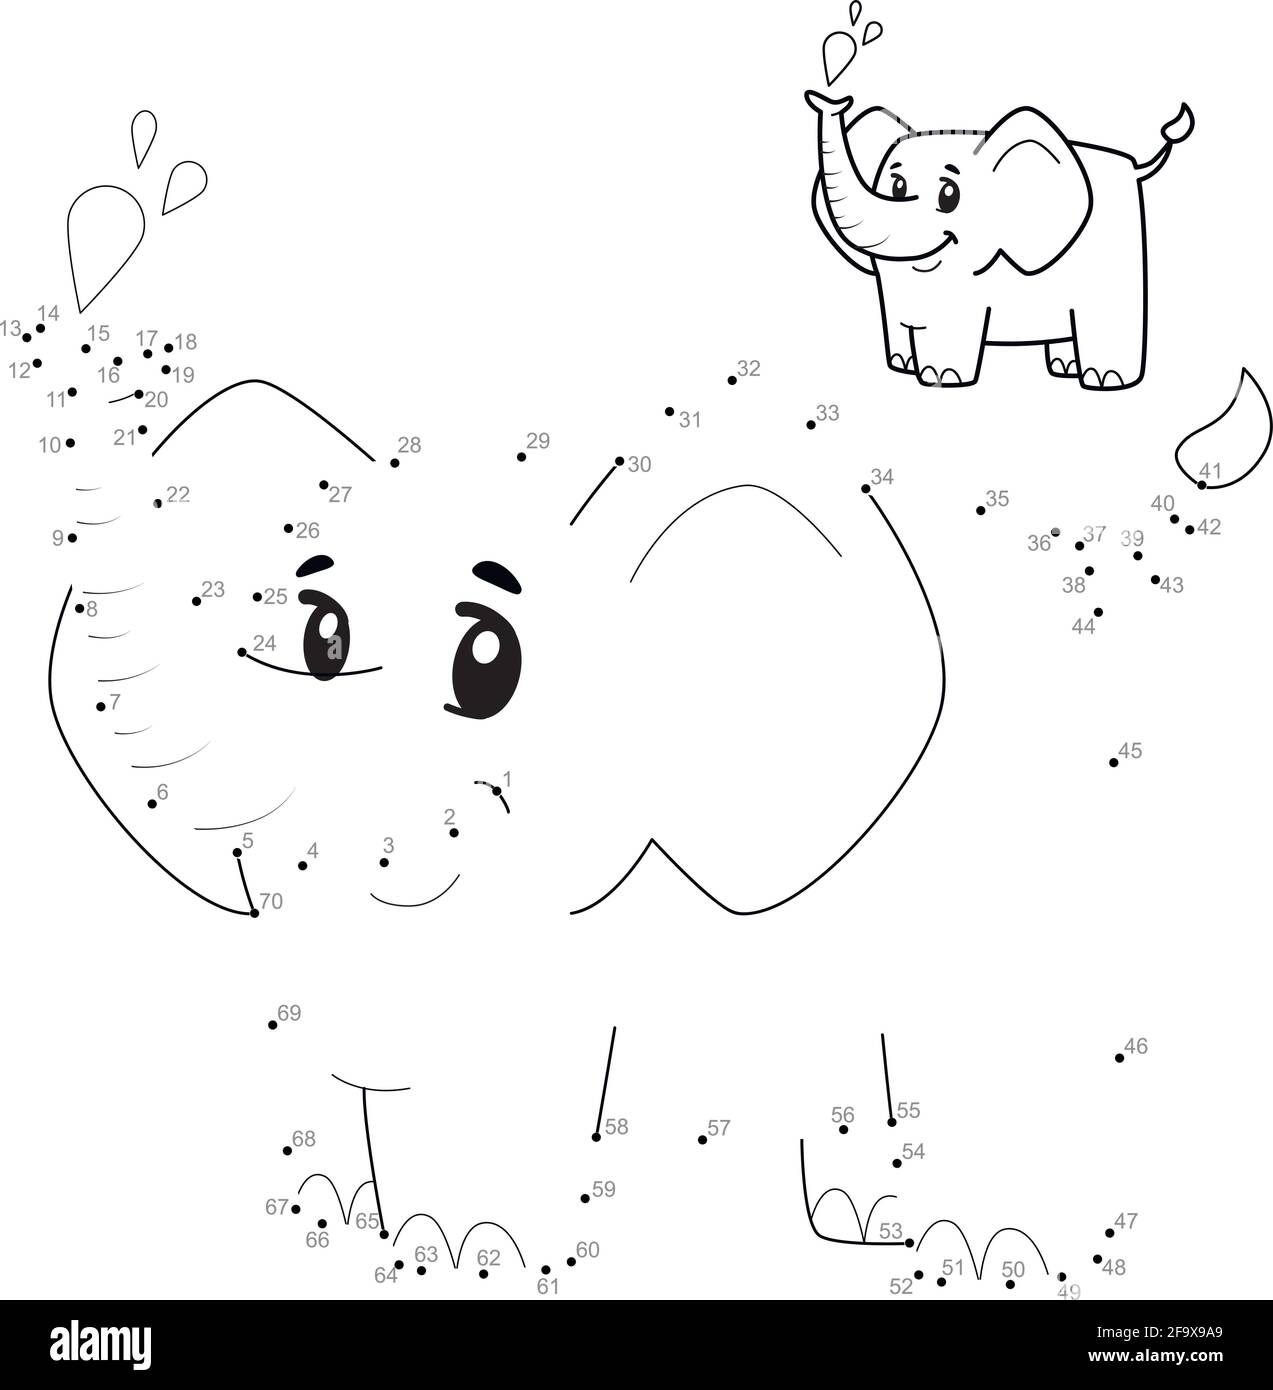 Dot to dot puzzle for children. Connect dots game. elephant ...